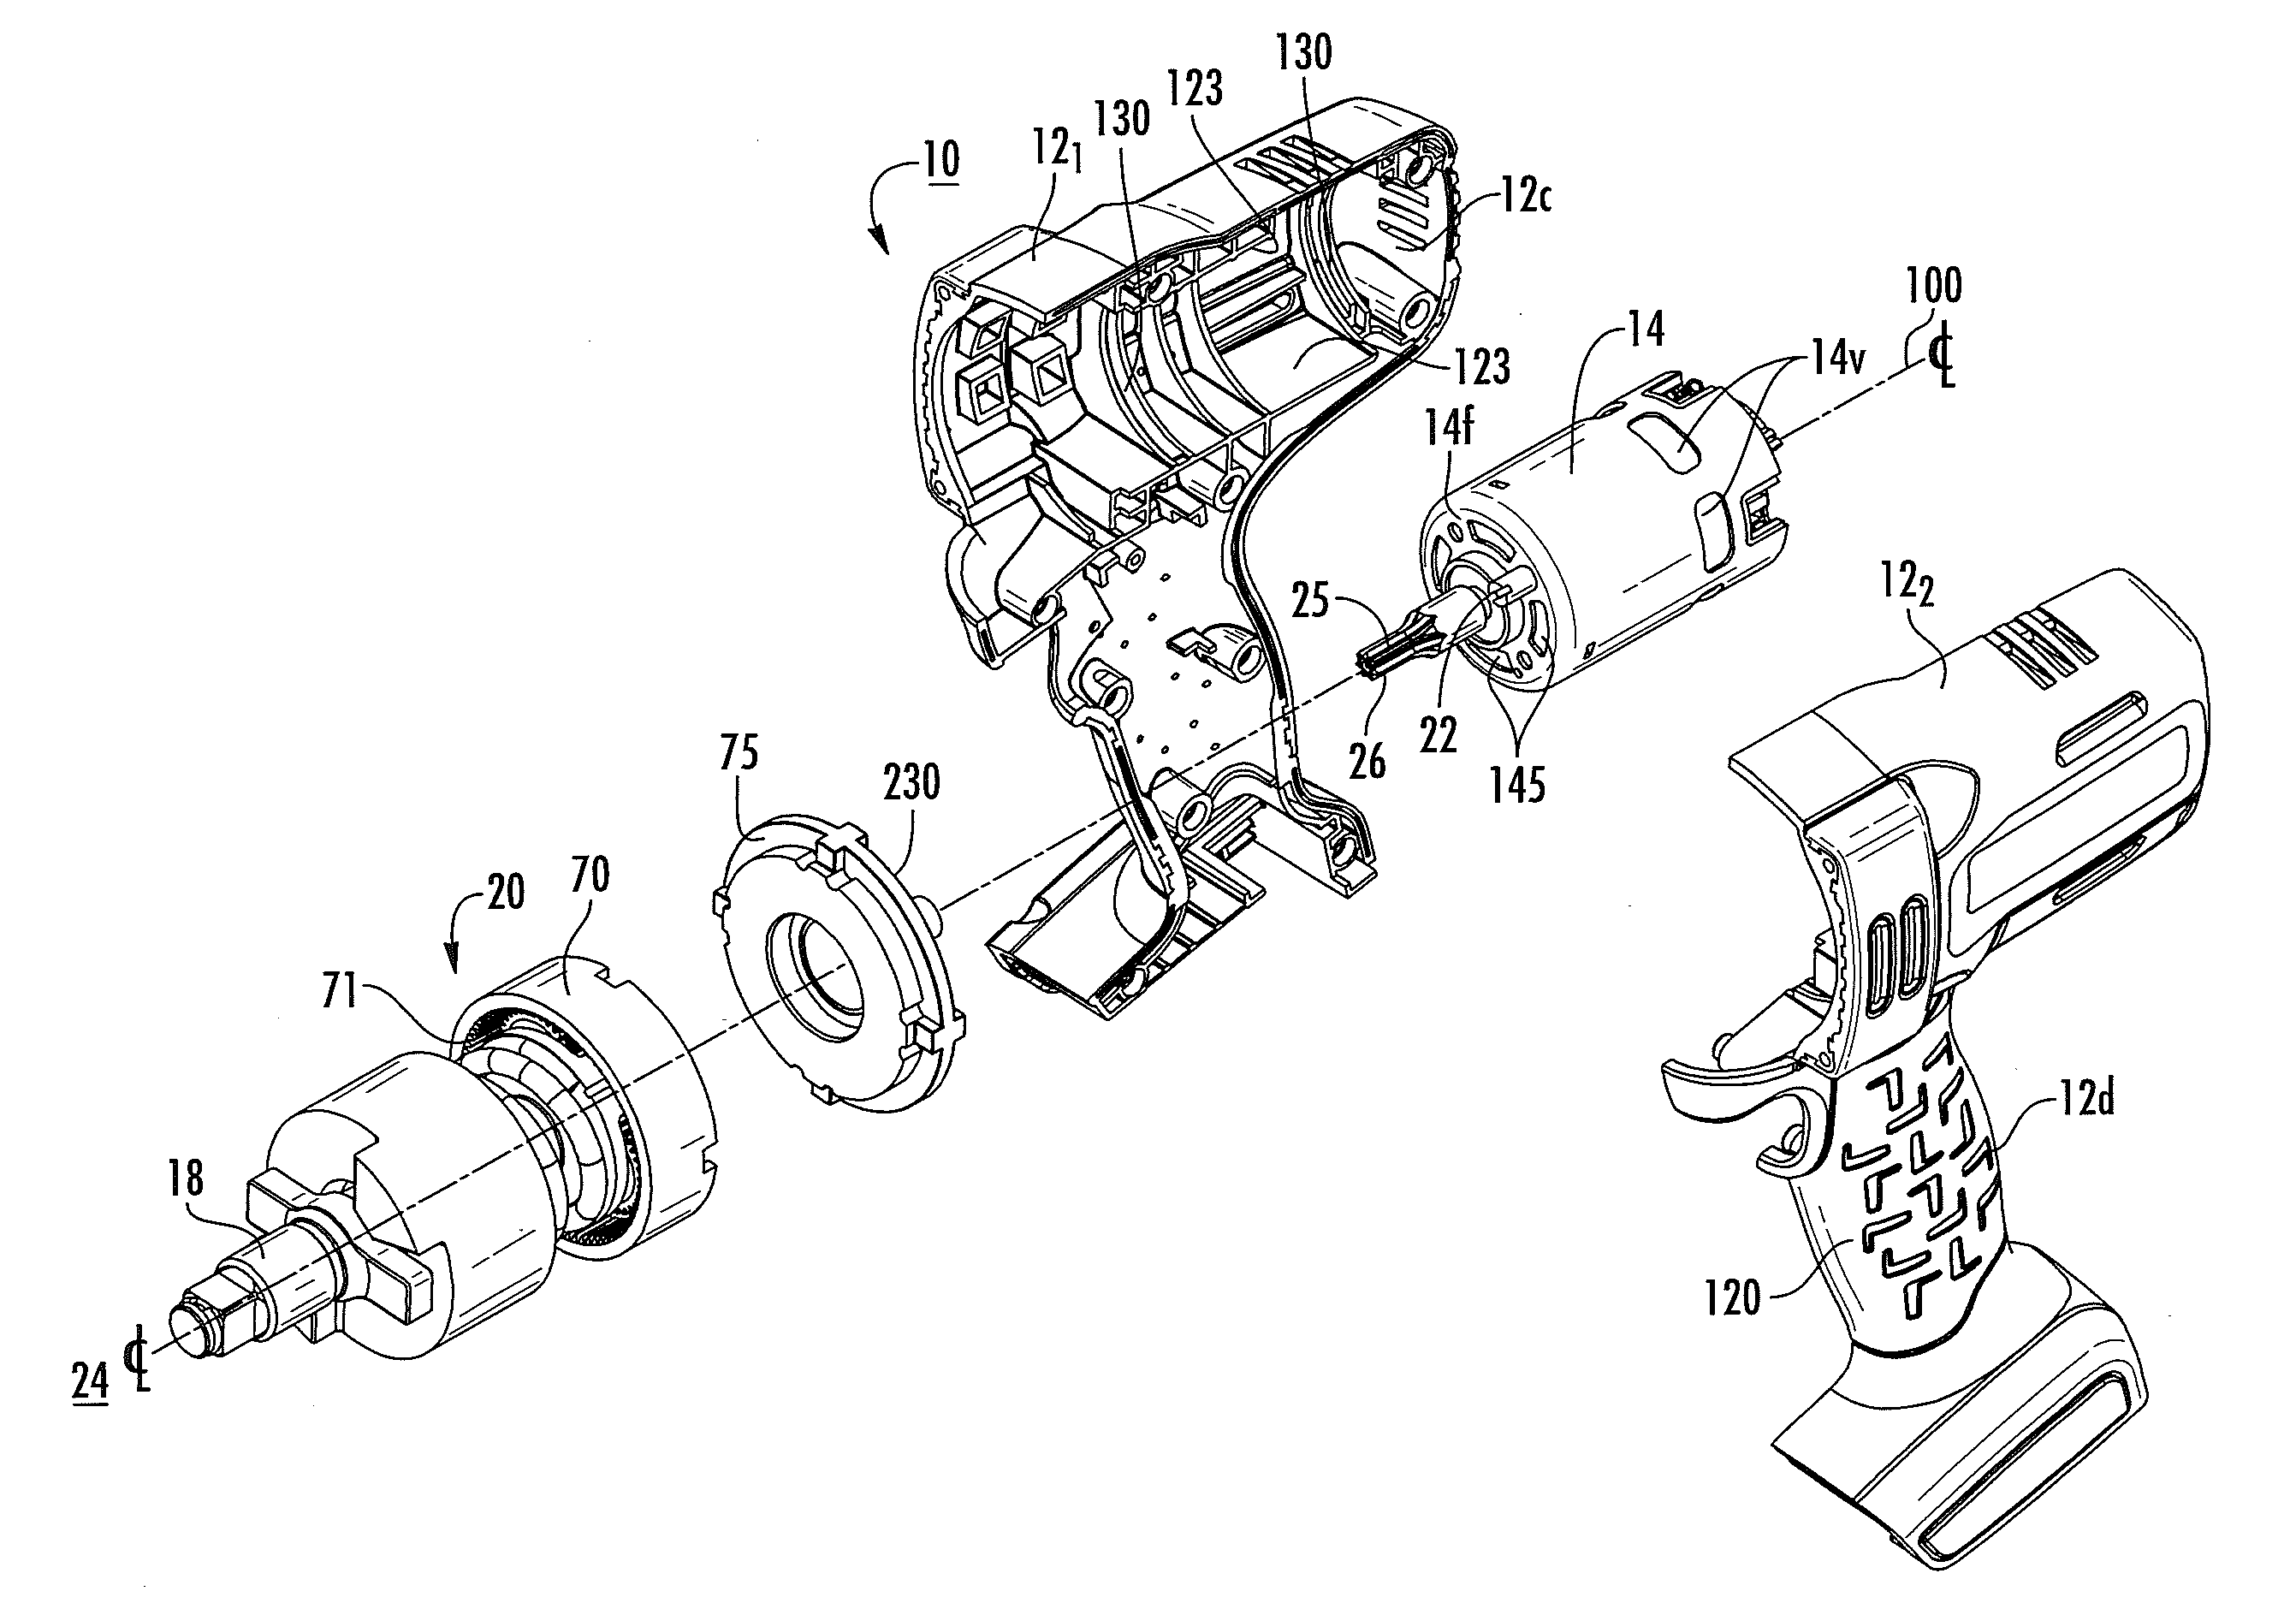 Power tools with housings having integral resilient motor mounts